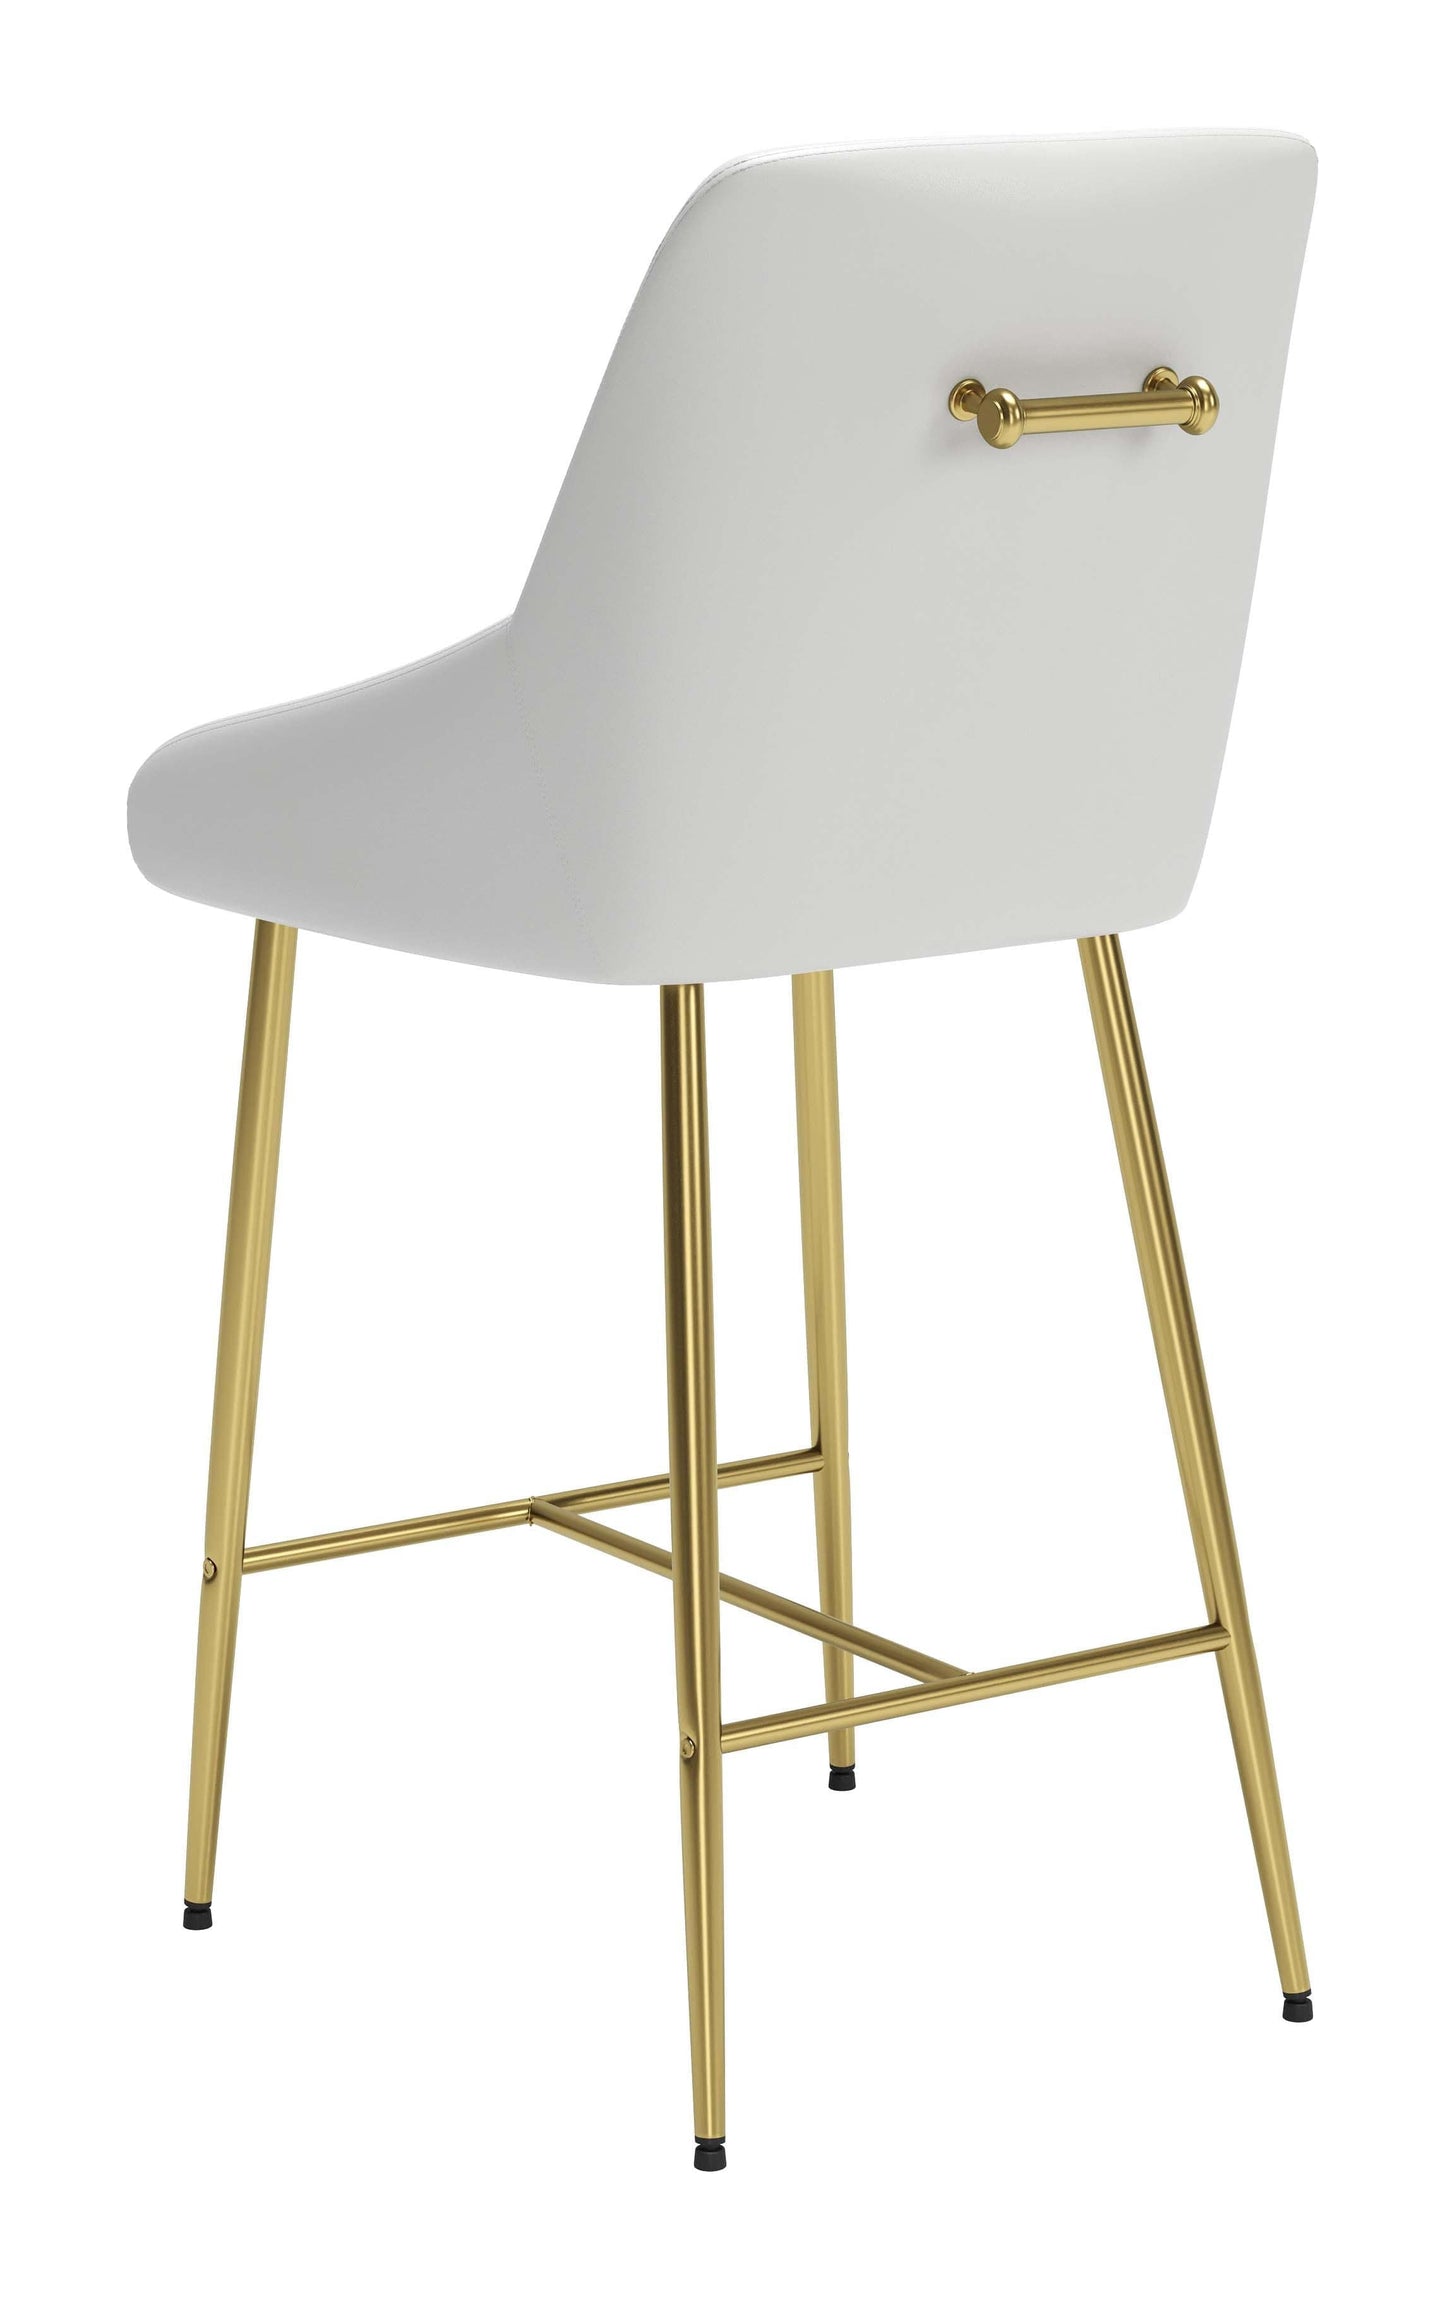 Angled back view of hospitality quality chair